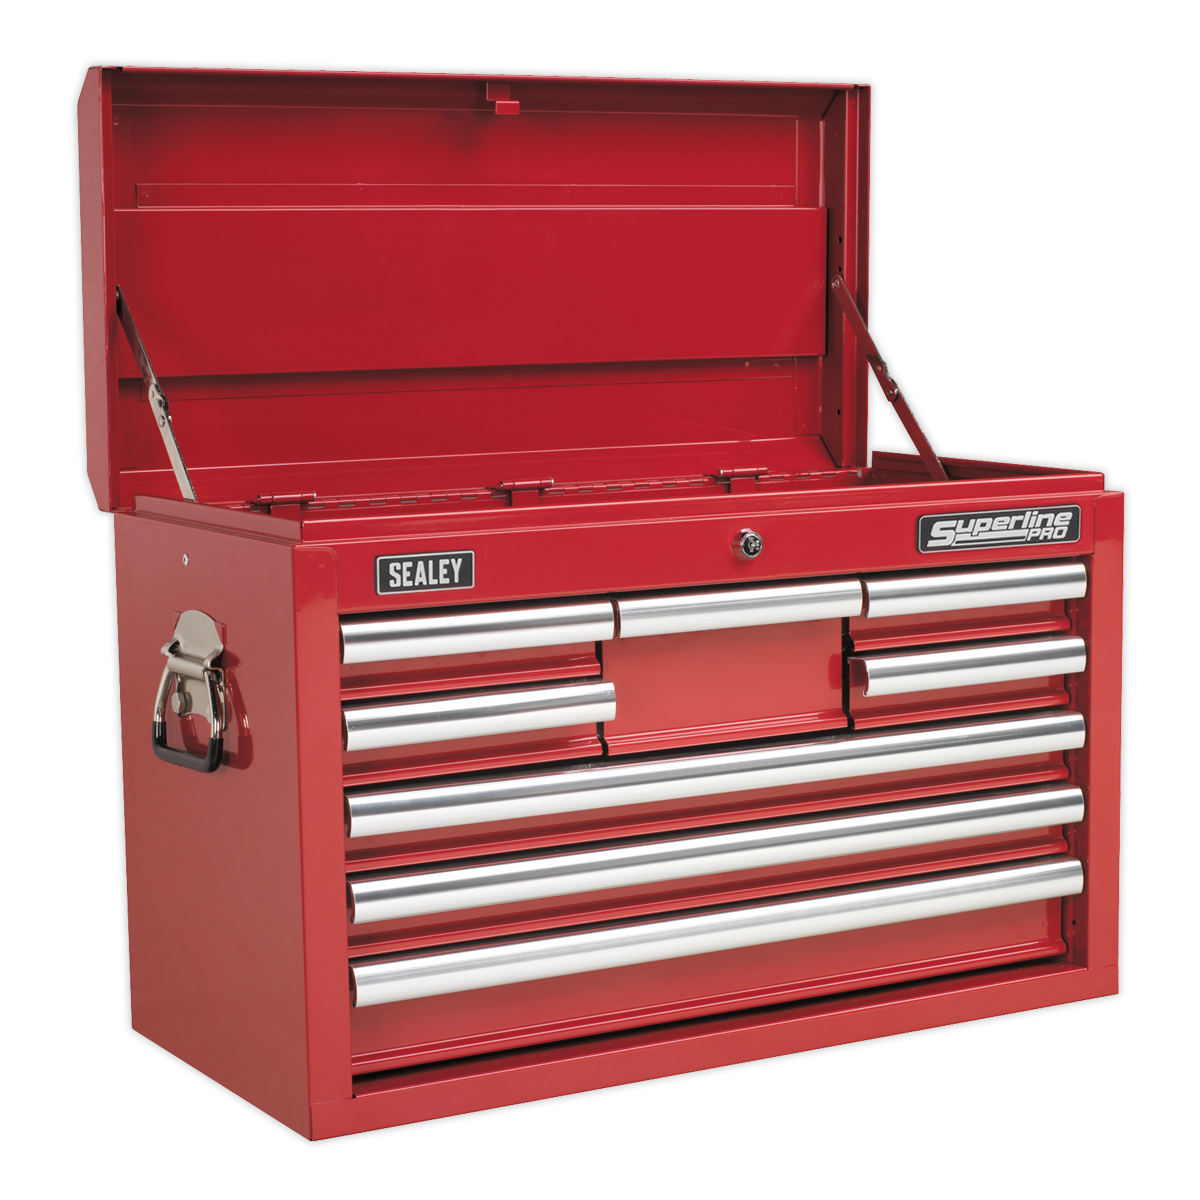 Topchest 8 Drawer with Ball-Bearing Slides - Red - AP33089 - Farming Parts